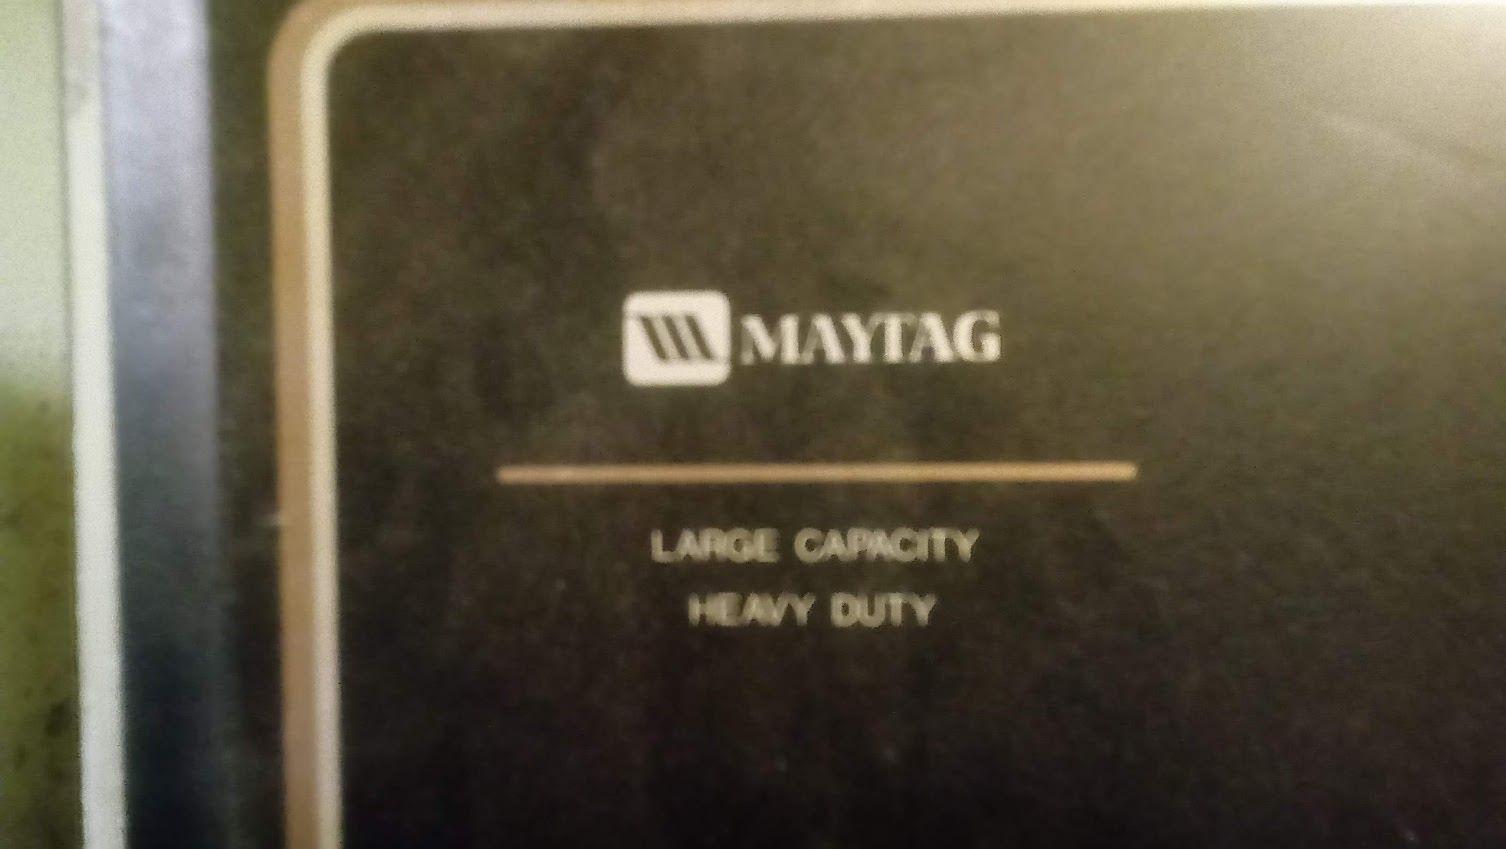 Old Maytag Logo - Paging Napolean: Old Maytag Washer Problem